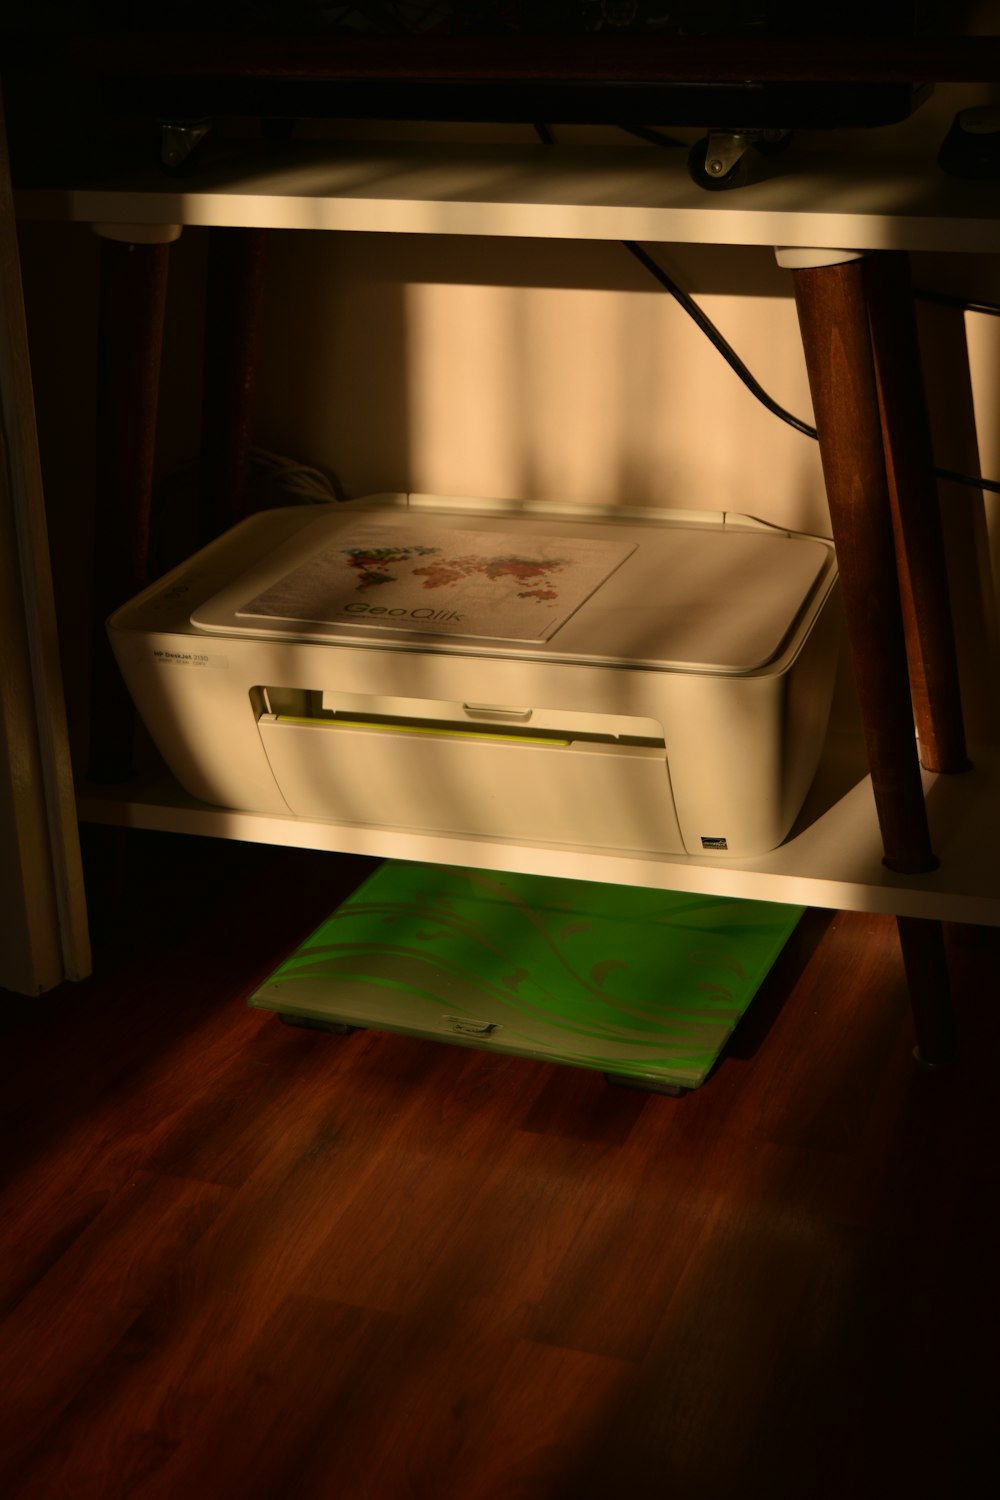 a white printer sitting on top of a wooden desk